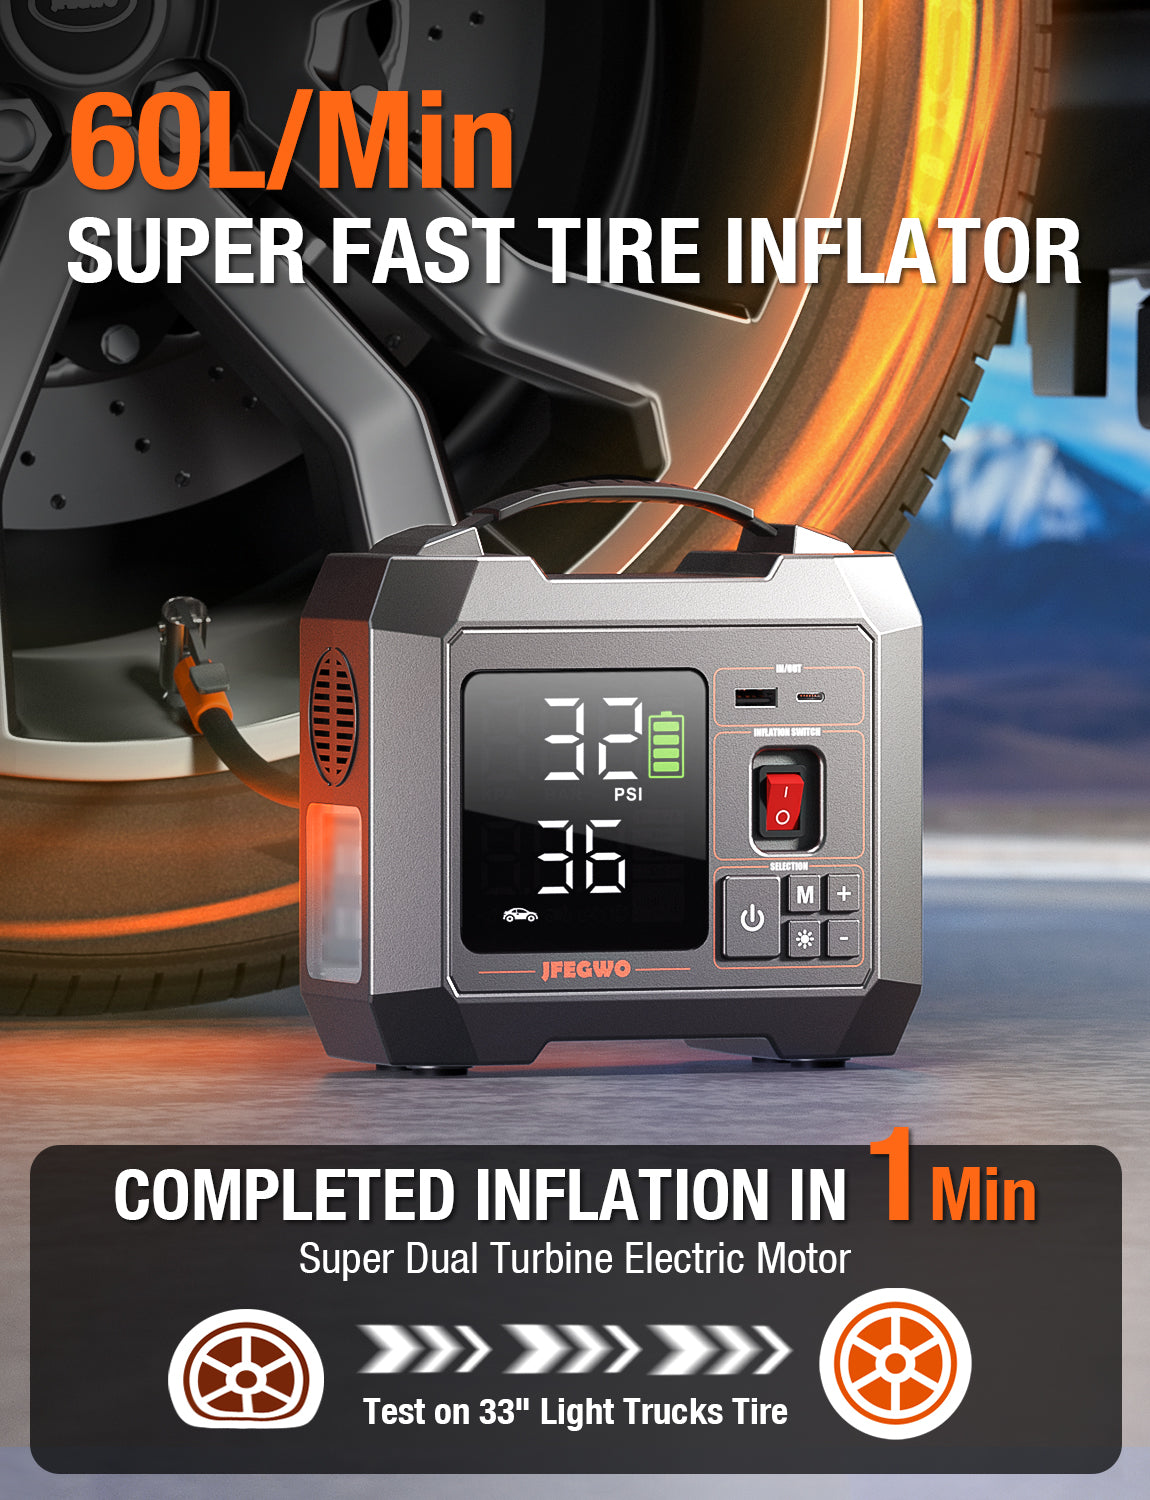 Sunpow 160-PSI Tire Inflator Portable Air Compressor for $80 - NW01-P